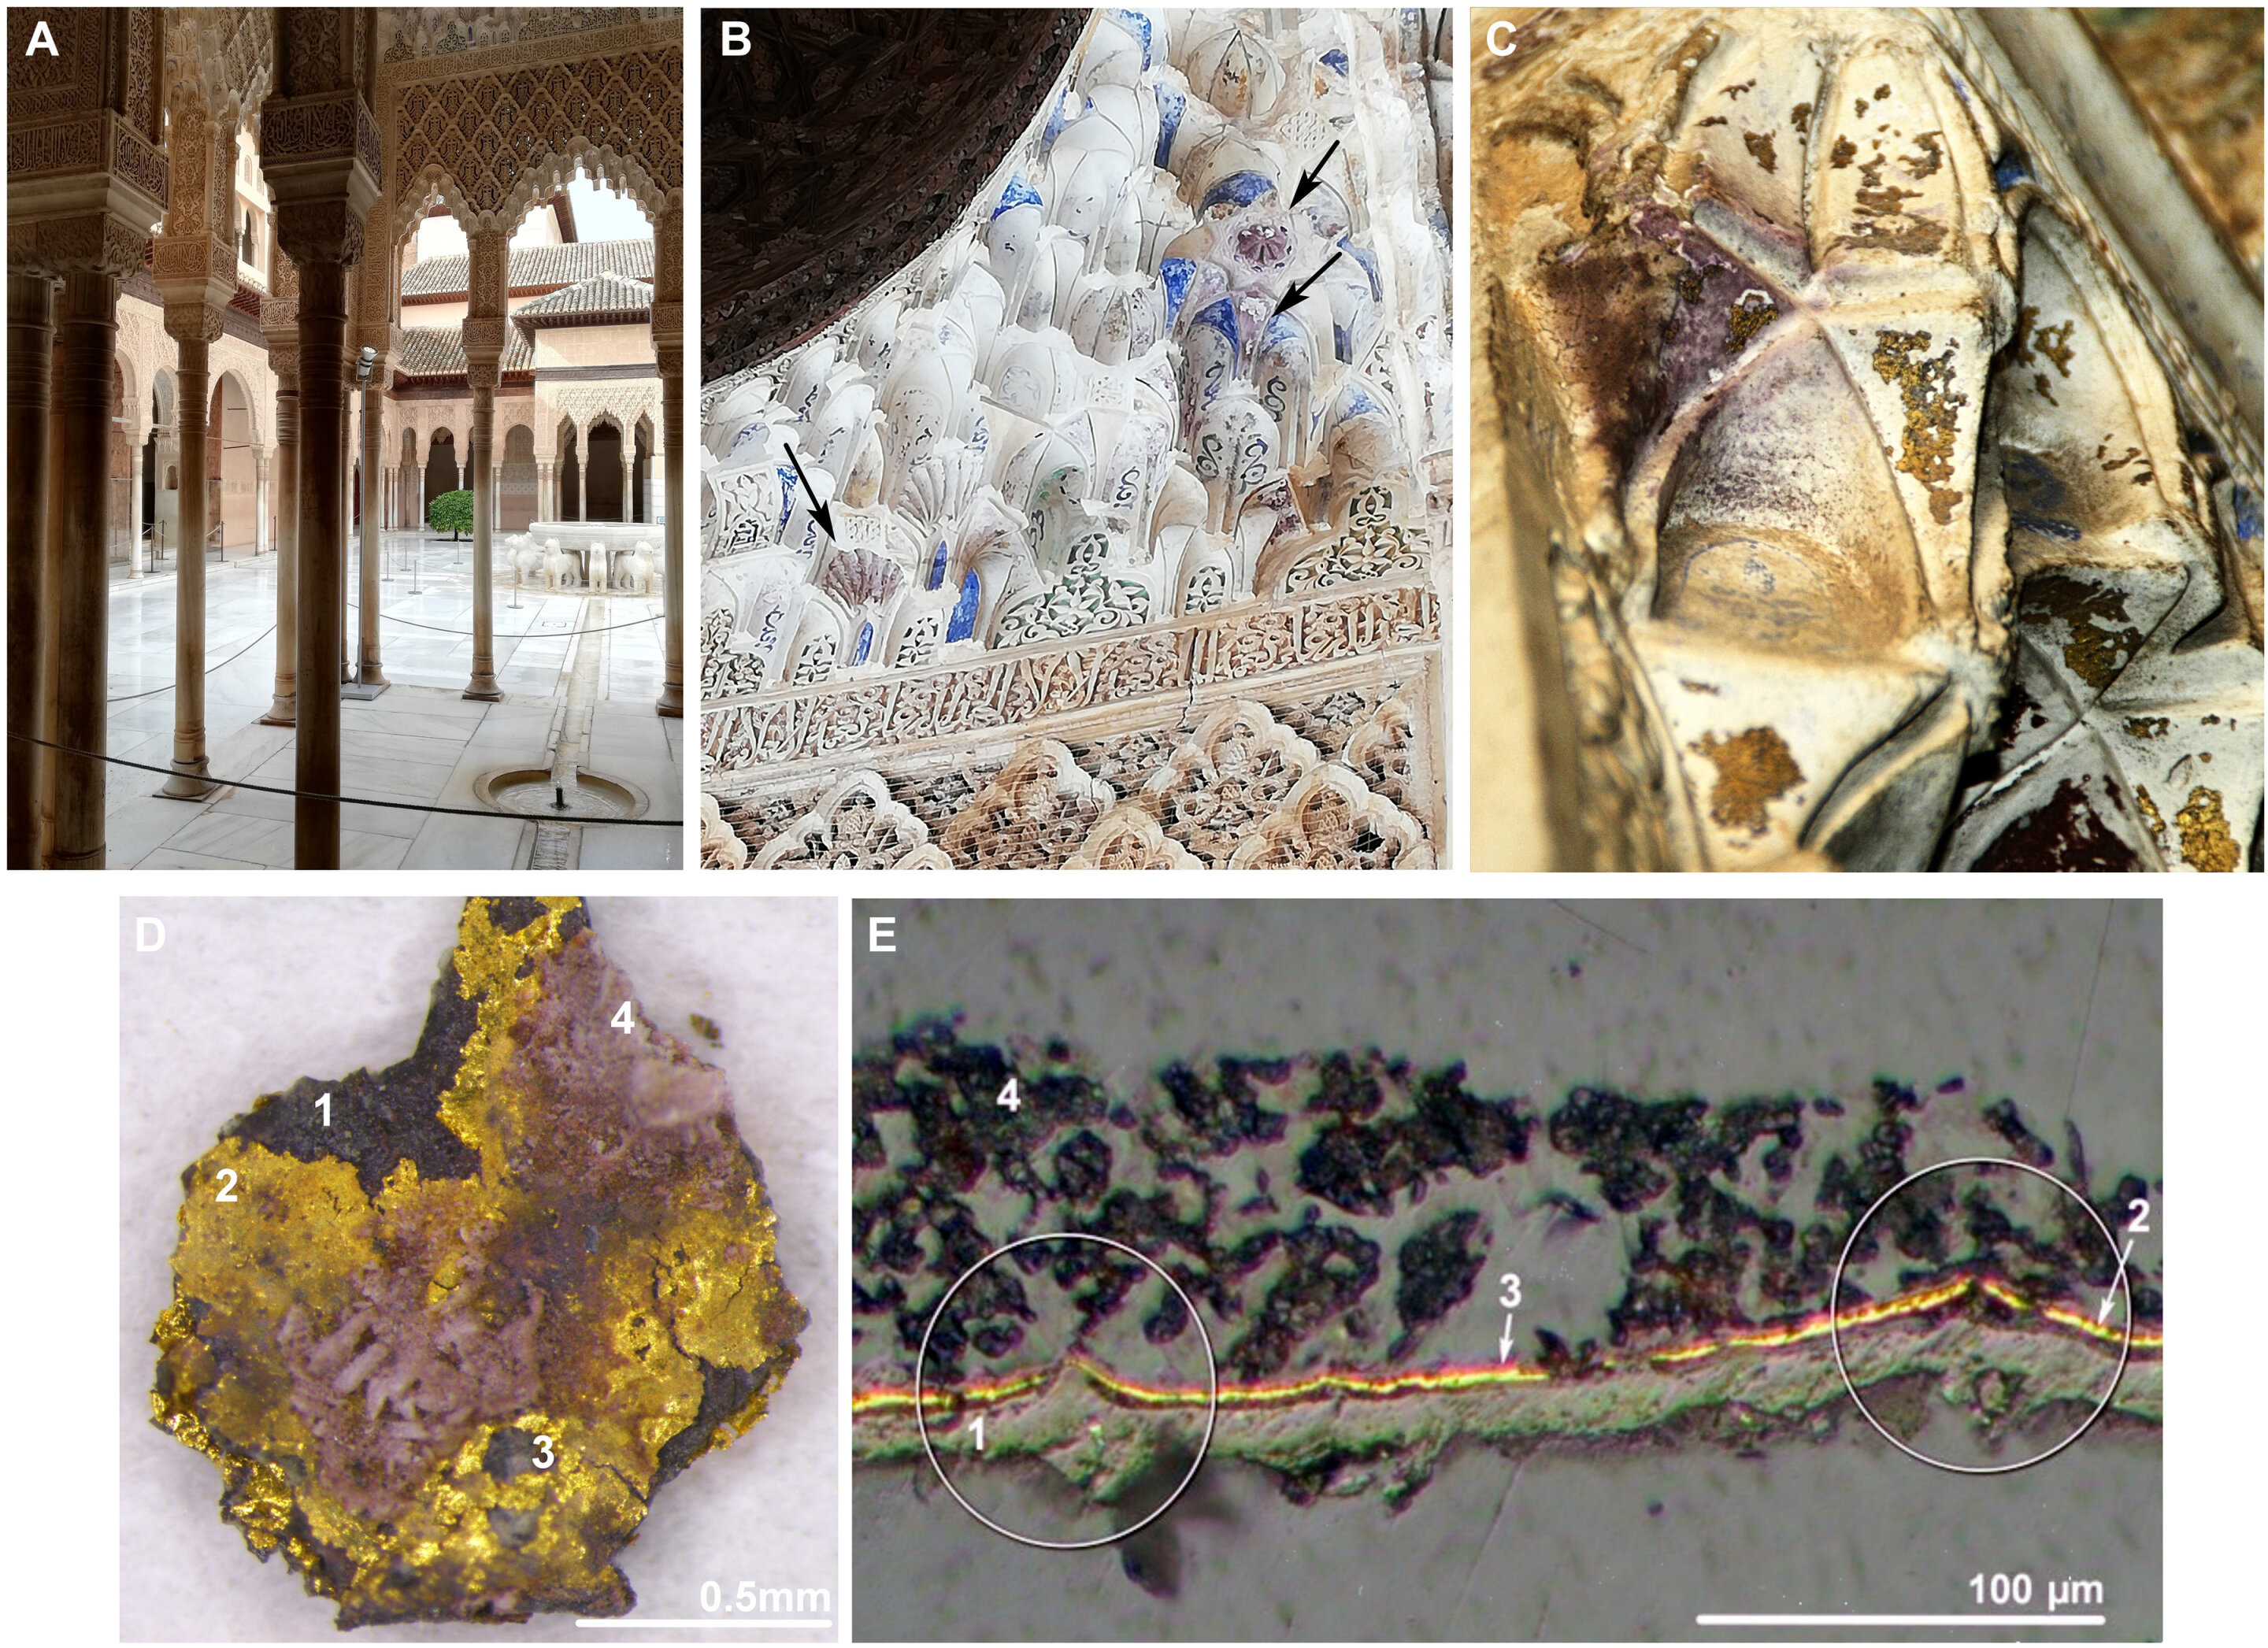 Electron microscopy reveals the reason for the purple stains on Alhambra ceilings